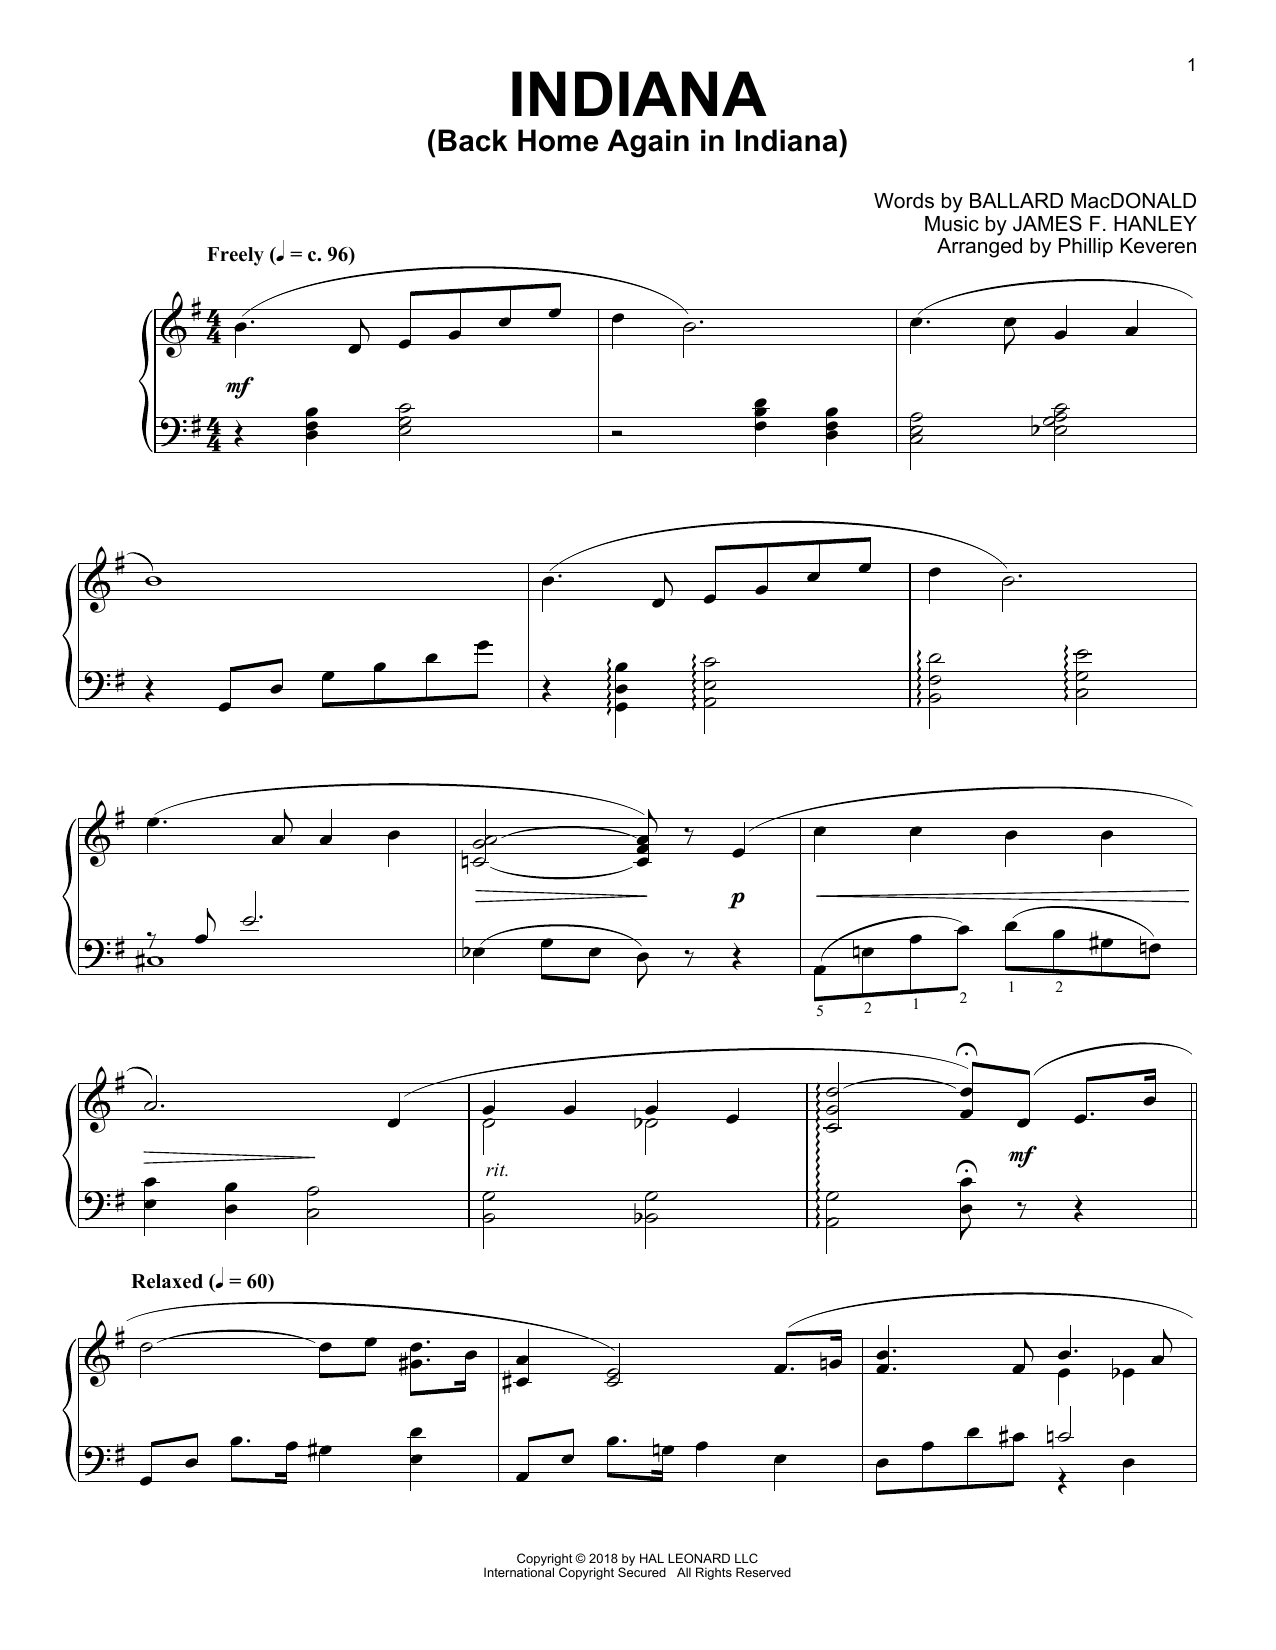 Download James F. Hanley Indiana (Back Home Again In Indiana) [J Sheet Music